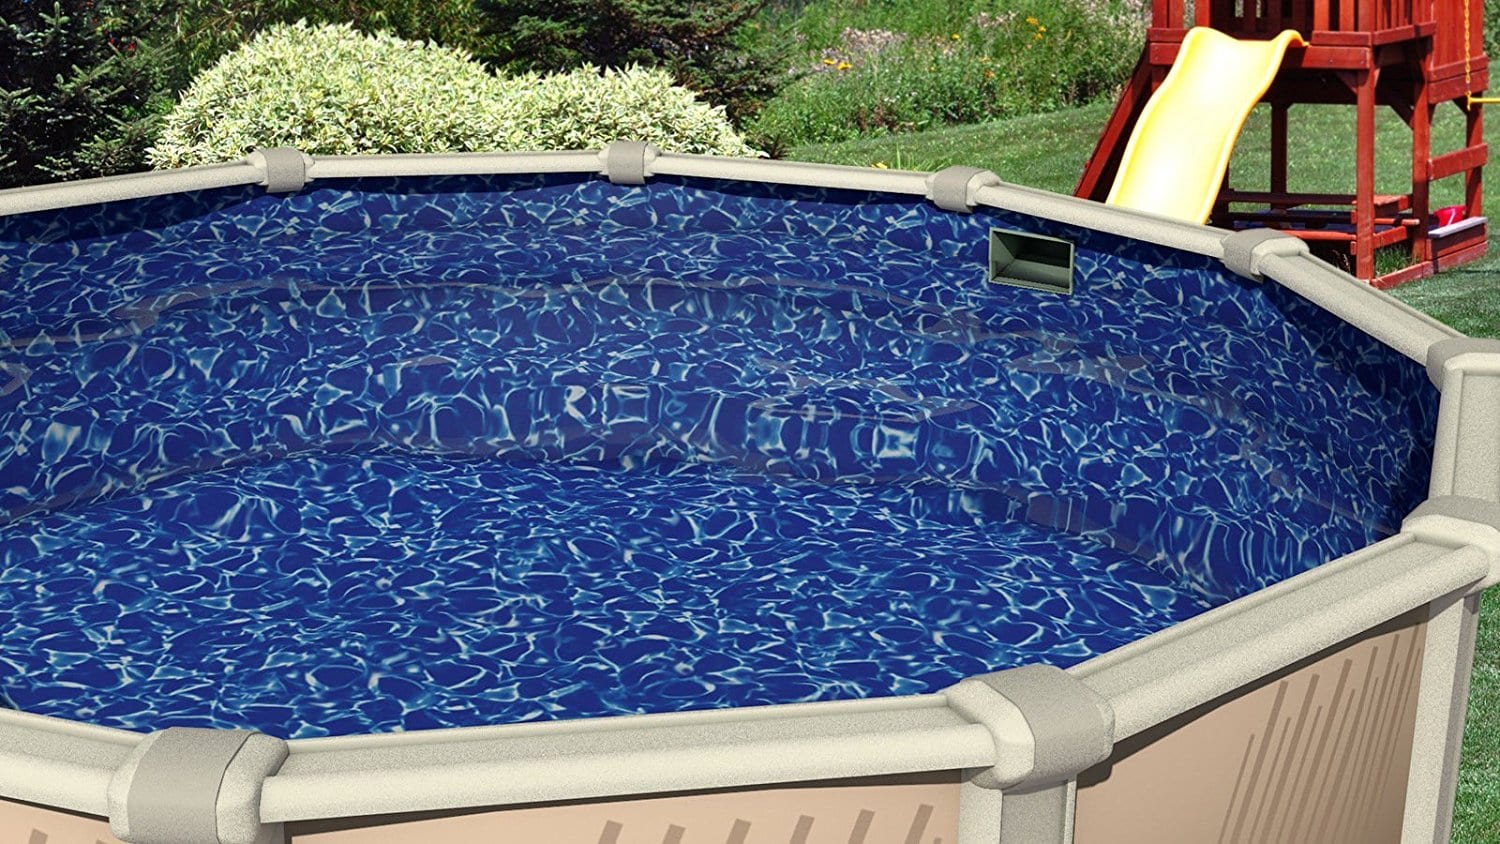 Top 3 Best Above Ground POOL LINERS (Cheap & Pricy) Review 2022